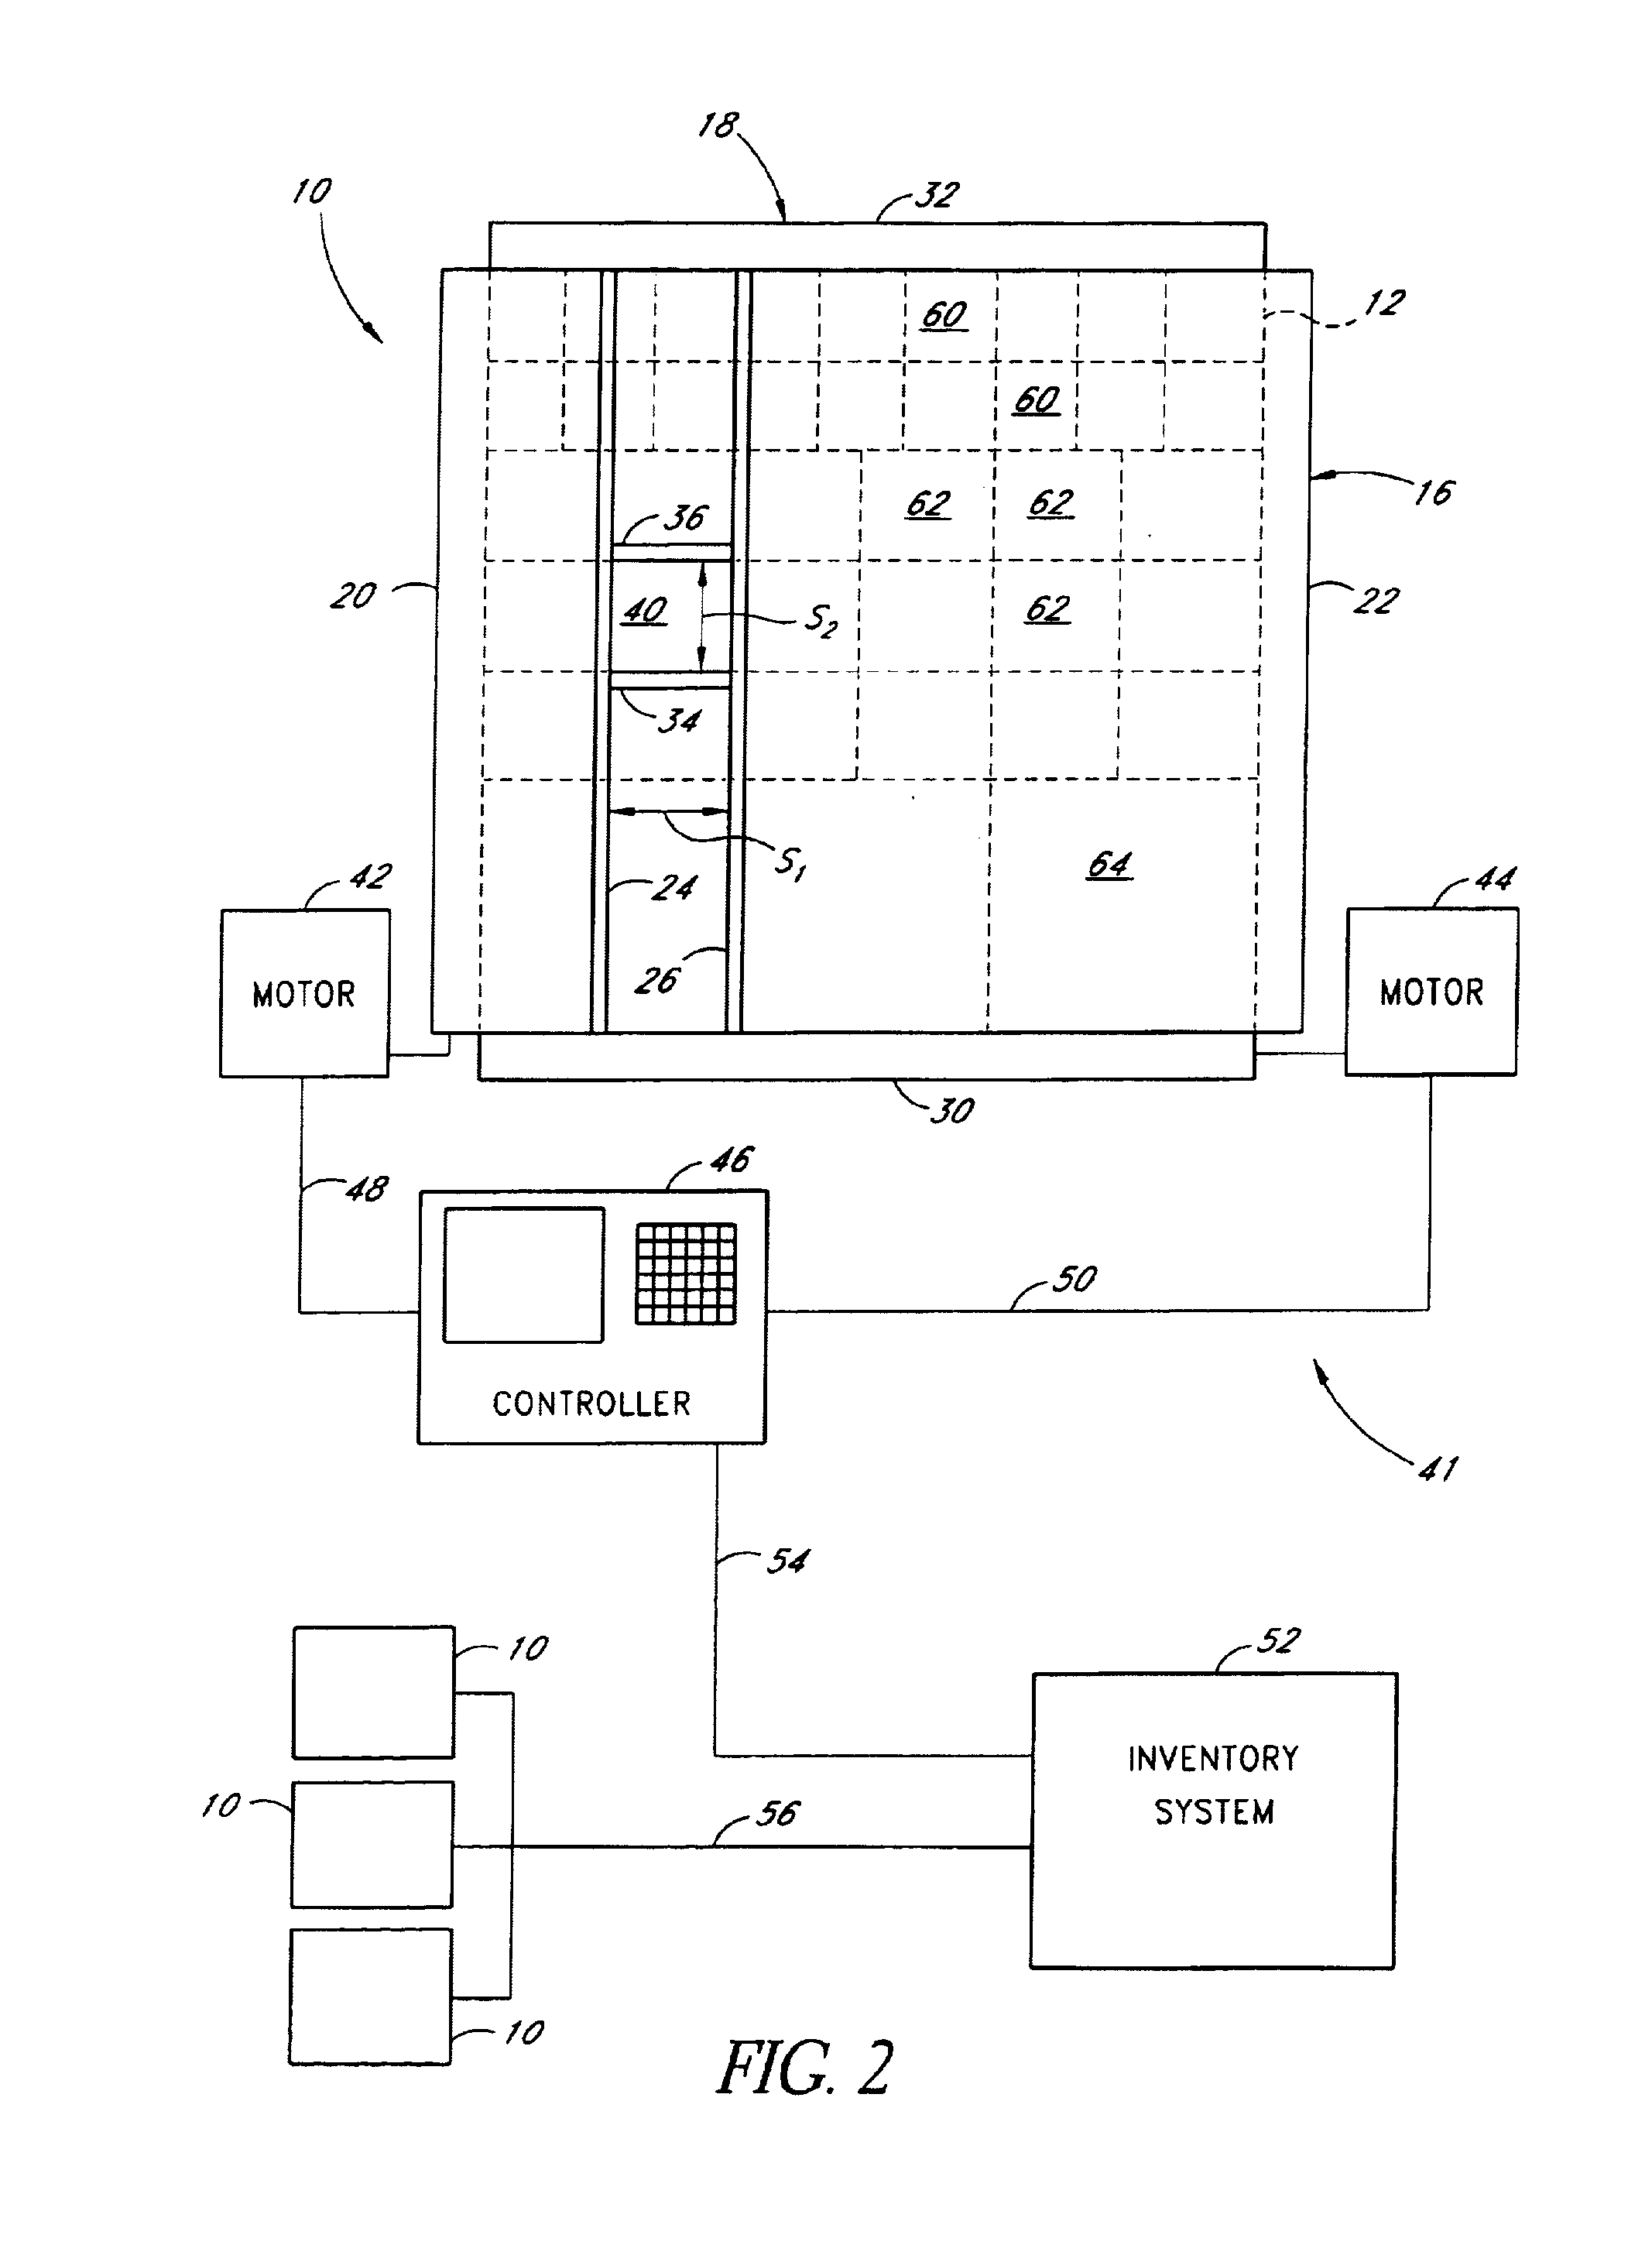 Controlled access dispensing system